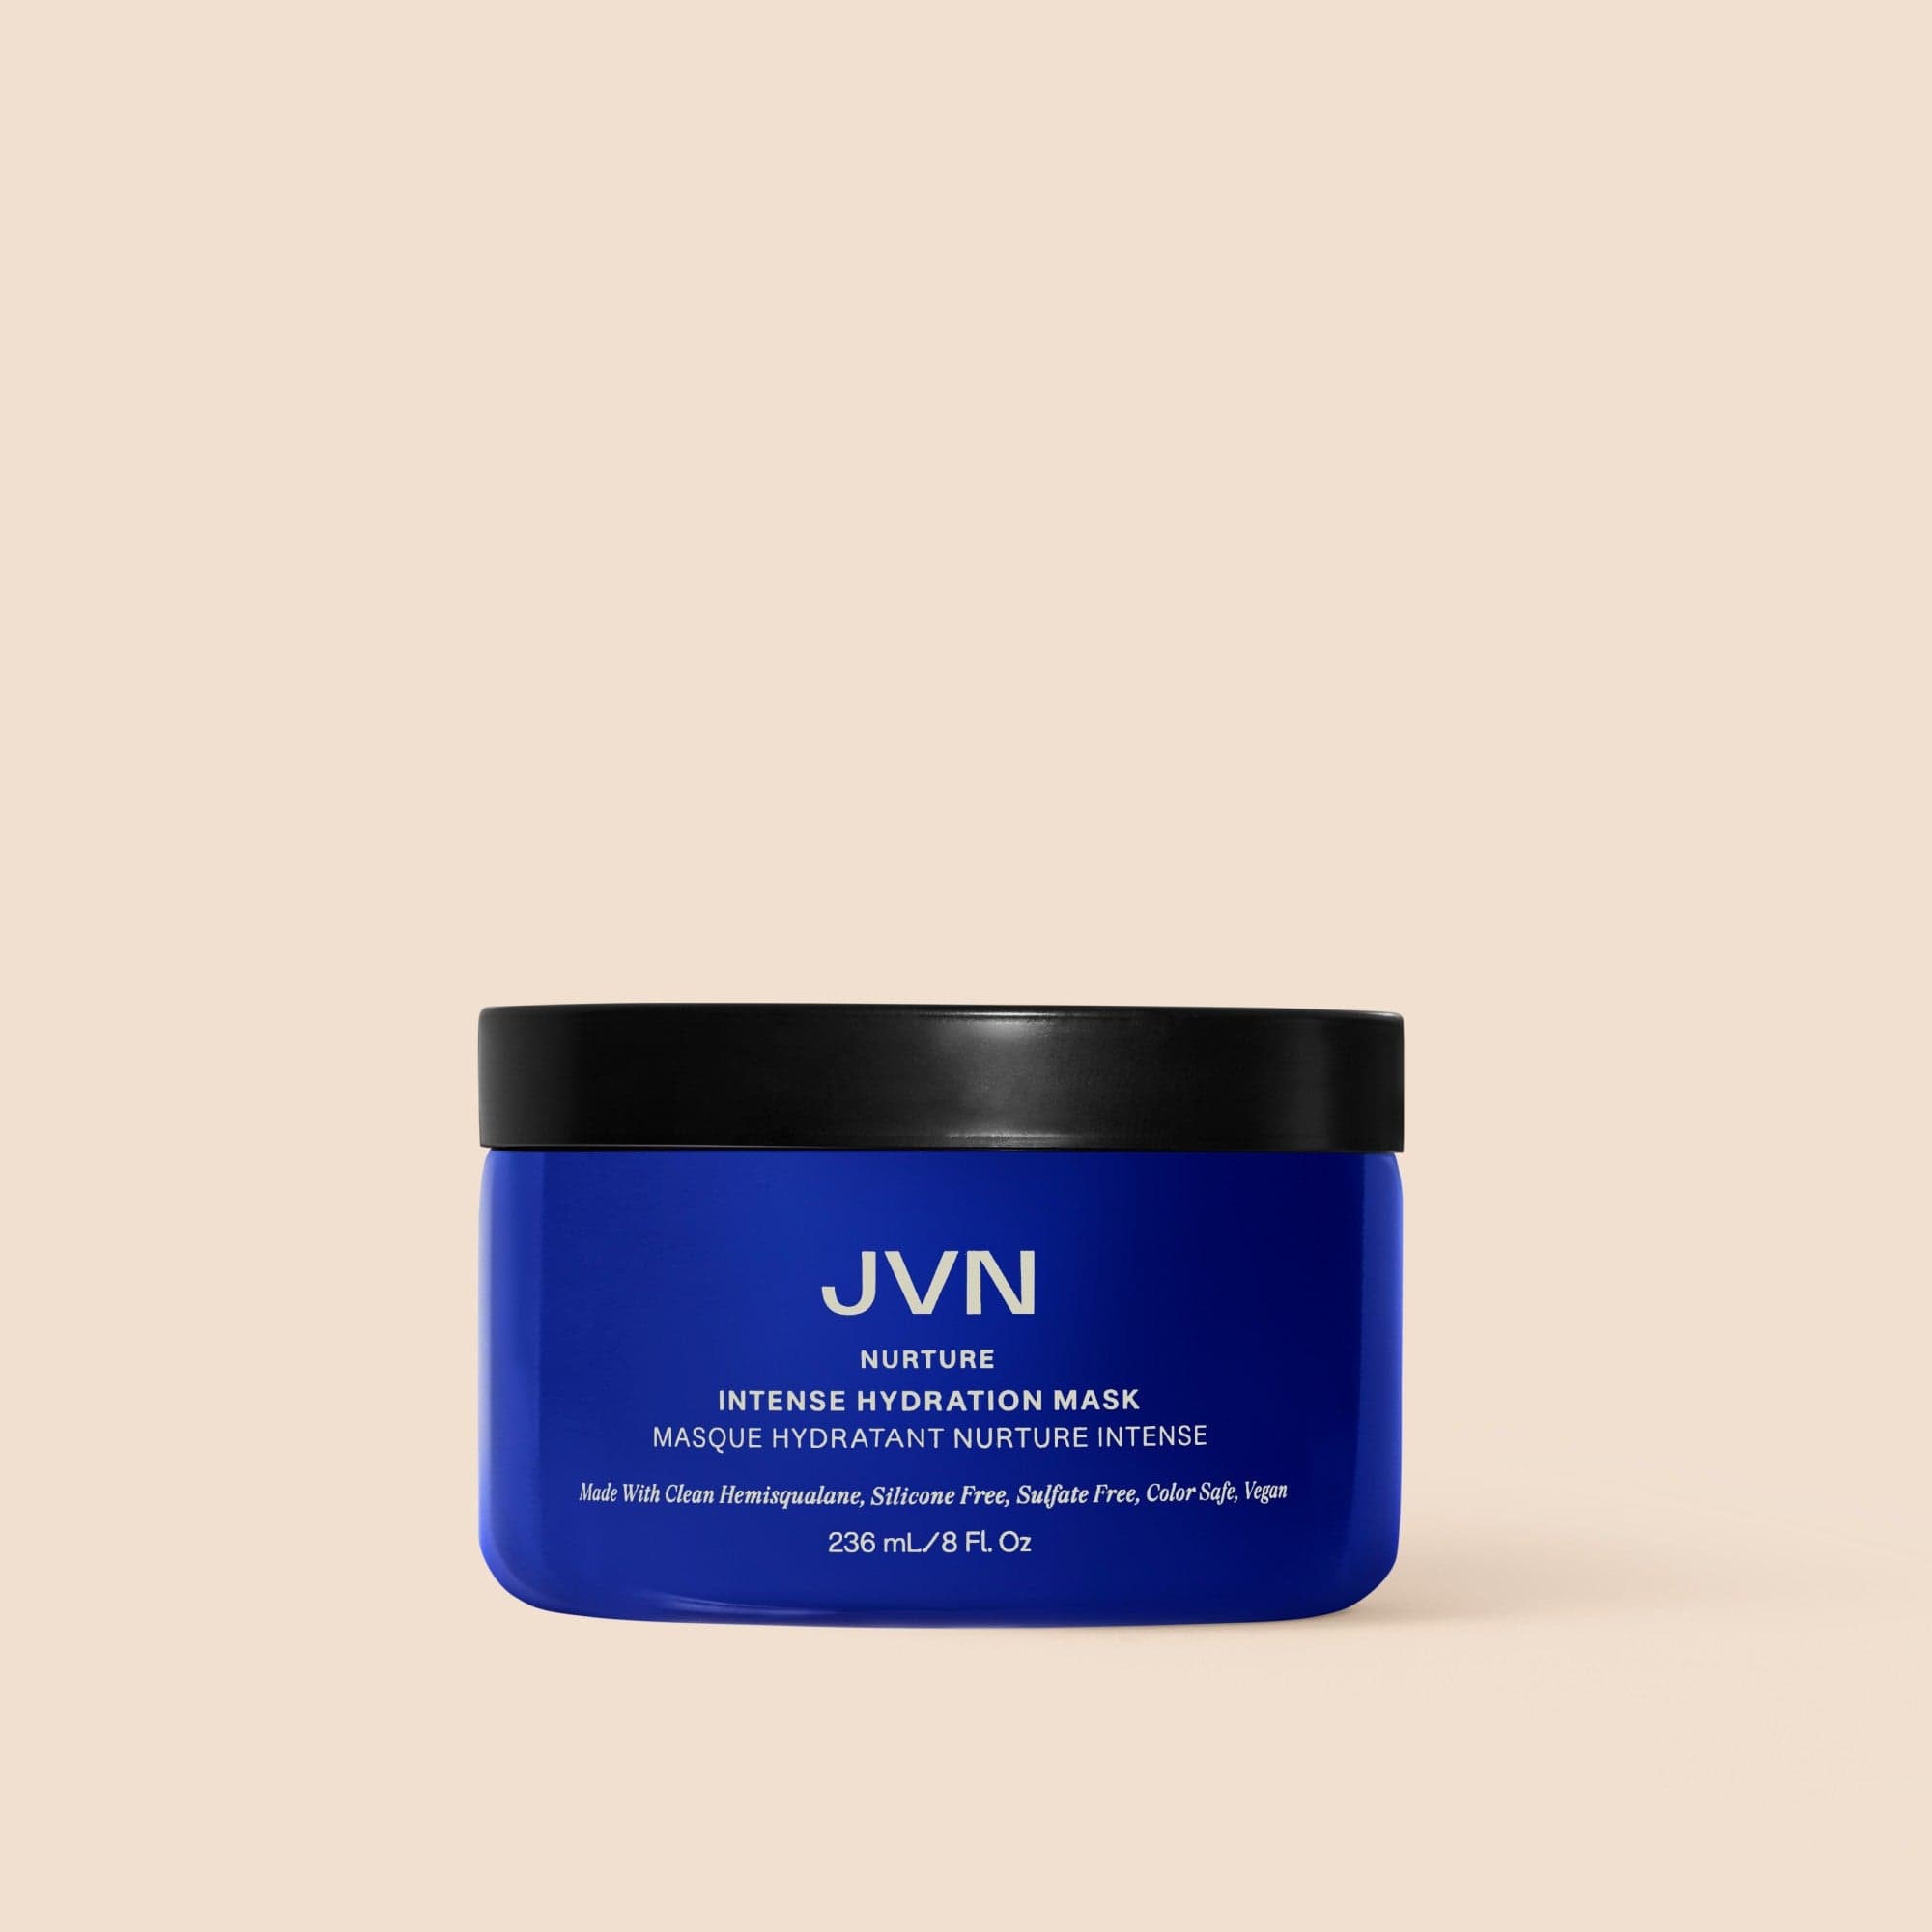 JVN Treatment Nurture Intense Hydration Mask sulfate-free silicone-free sustainable